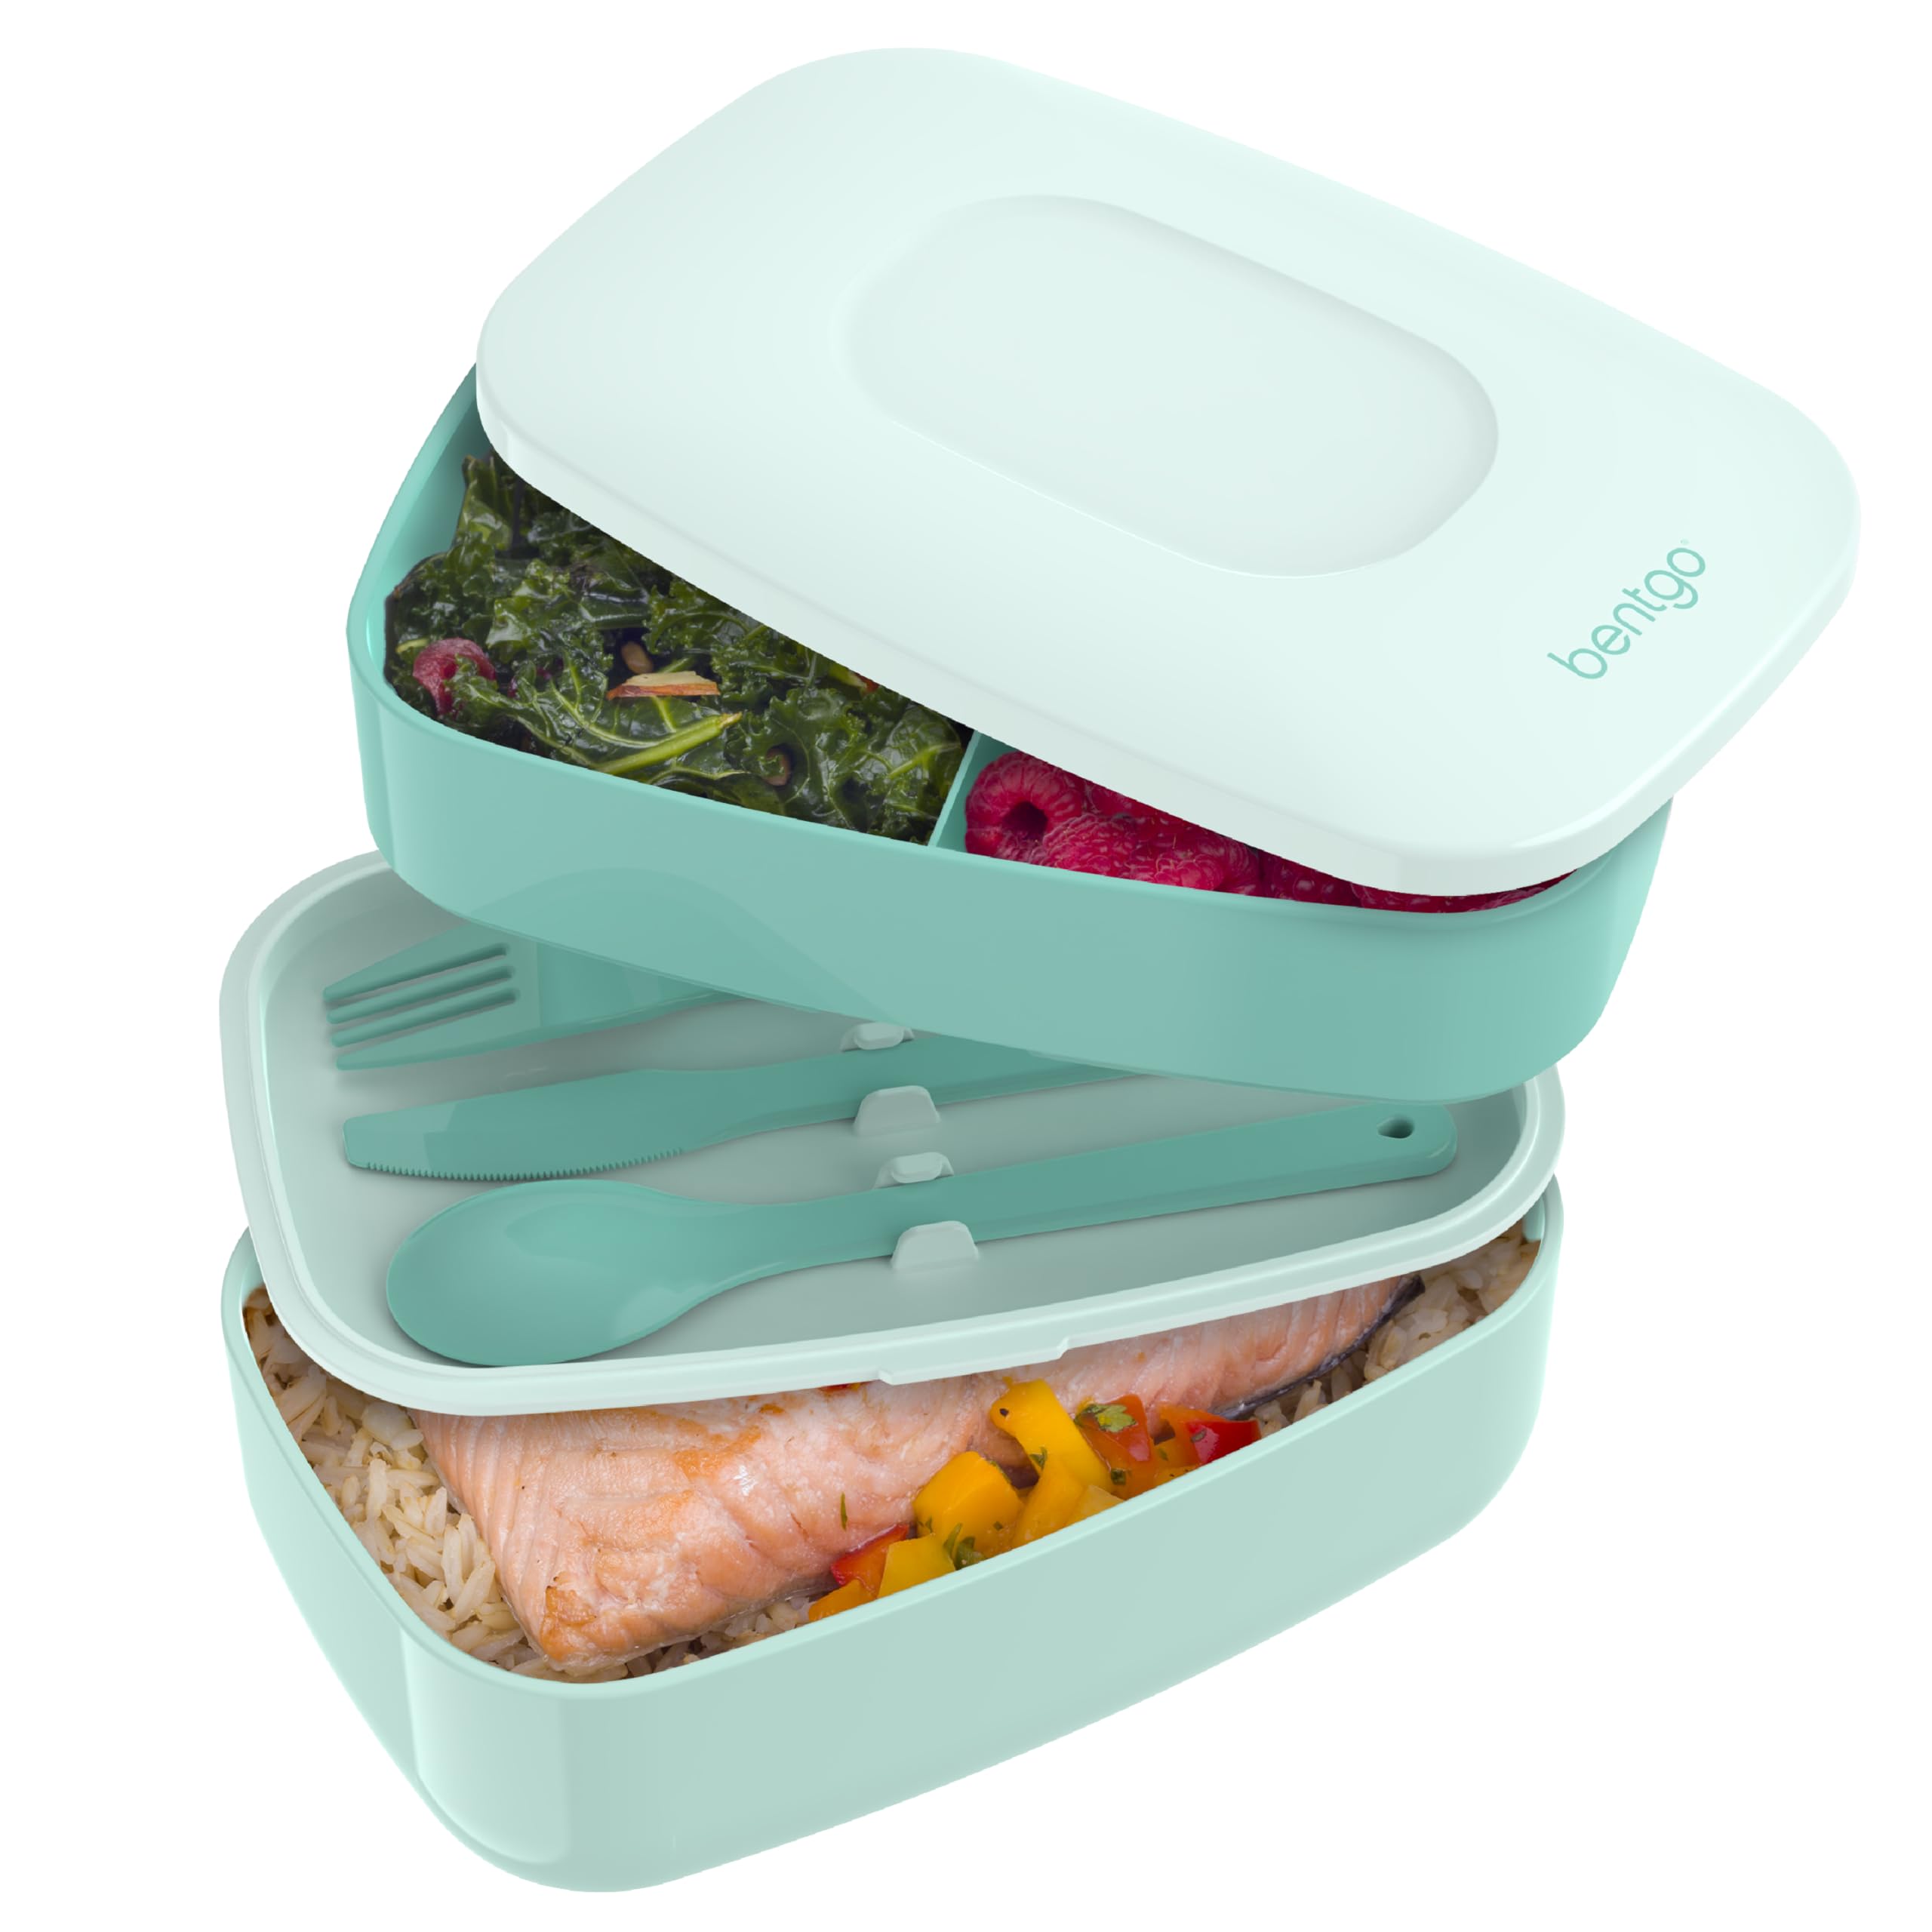 Bentgo Classic All-in-One Stackable Bento Lunch Box BPA-Free Container w/ 3 Compartments, Plastic Utensils & Nylon Sealing Strap $14.99 + Free Shipping w/ Prime or on $35+